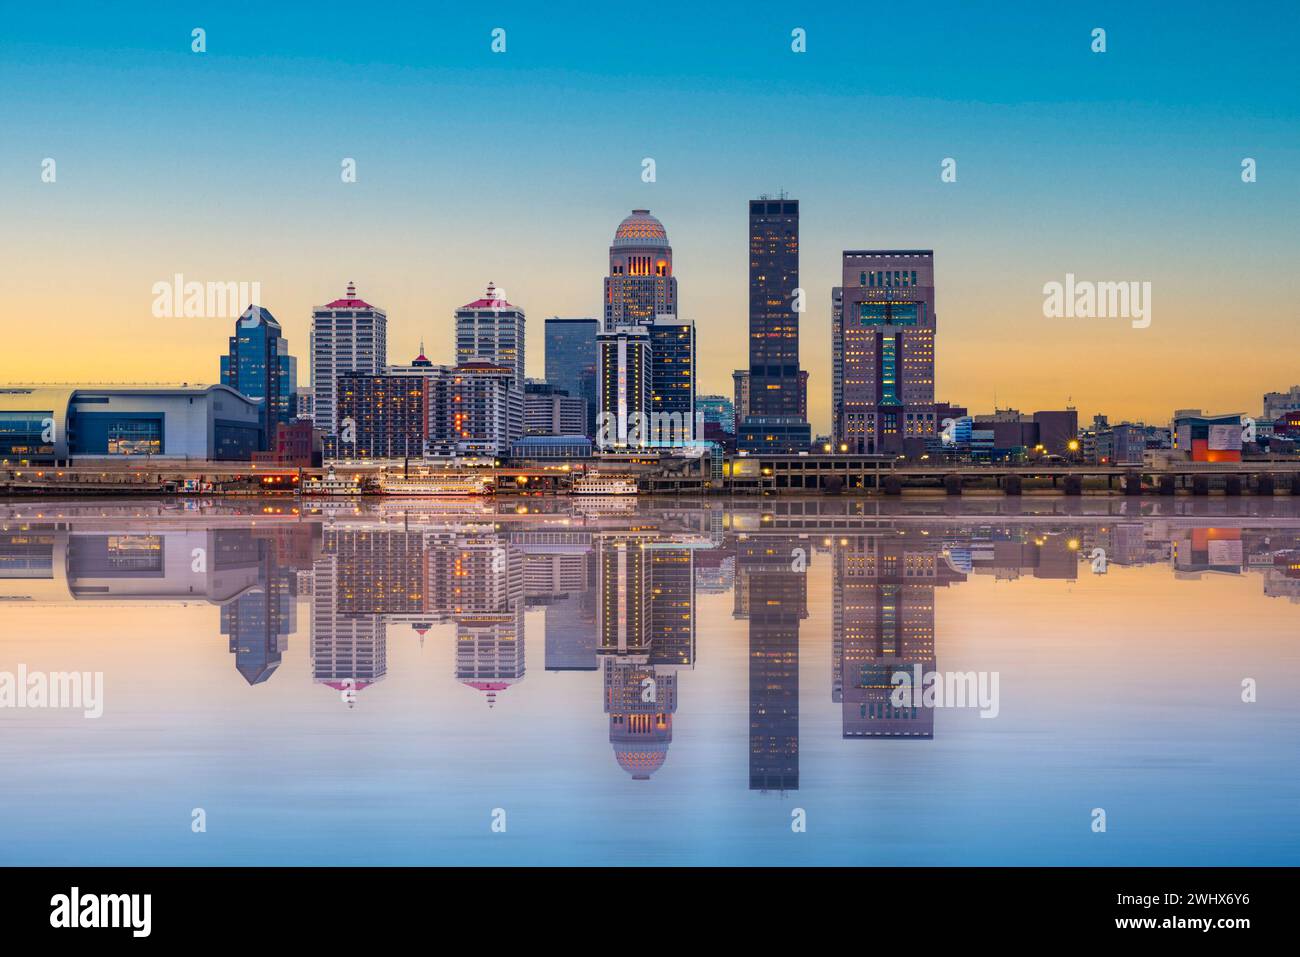 Beautiful sunset night view of Louisville Kentucky Skyline with river and lit buildings Stock Photo